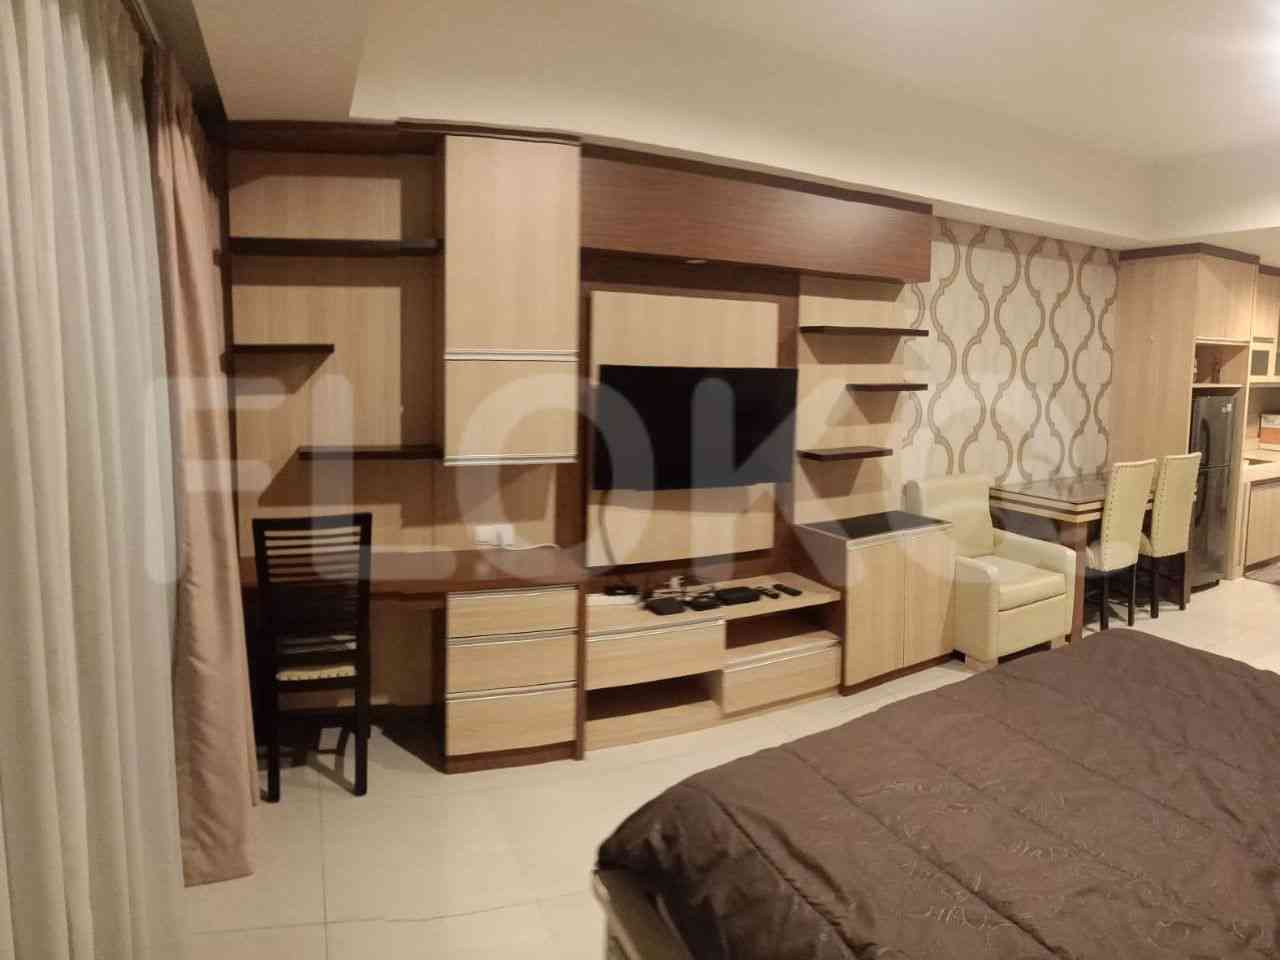 1 Bedroom on 7th Floor for Rent in Kemang Village Residence - fkee3b 2